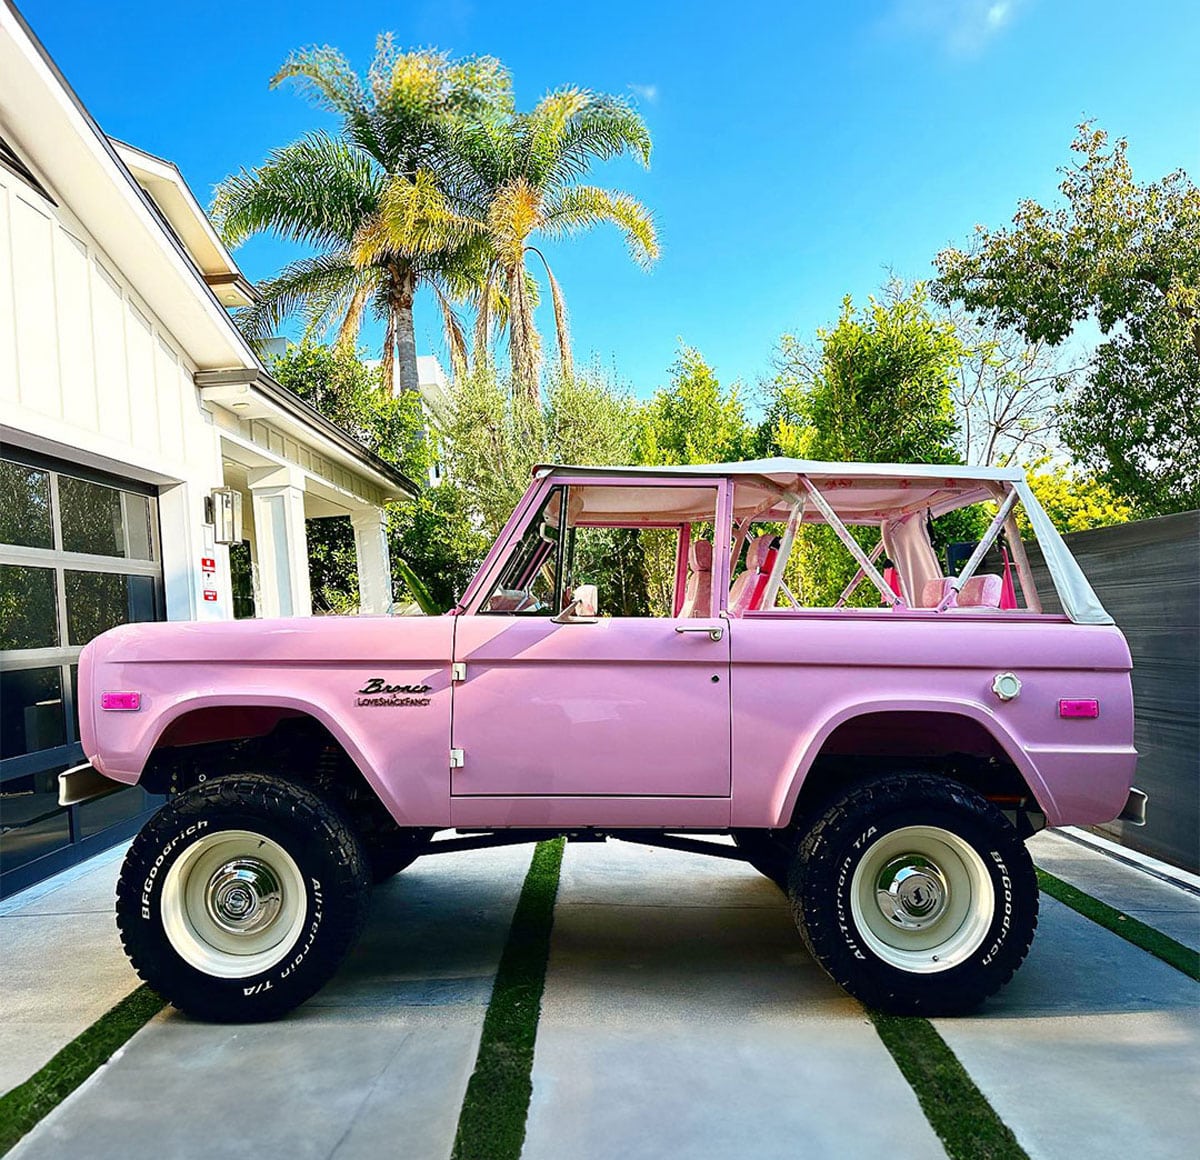 Pink Vintage Broncos: A Statement of Style and Nostalgia